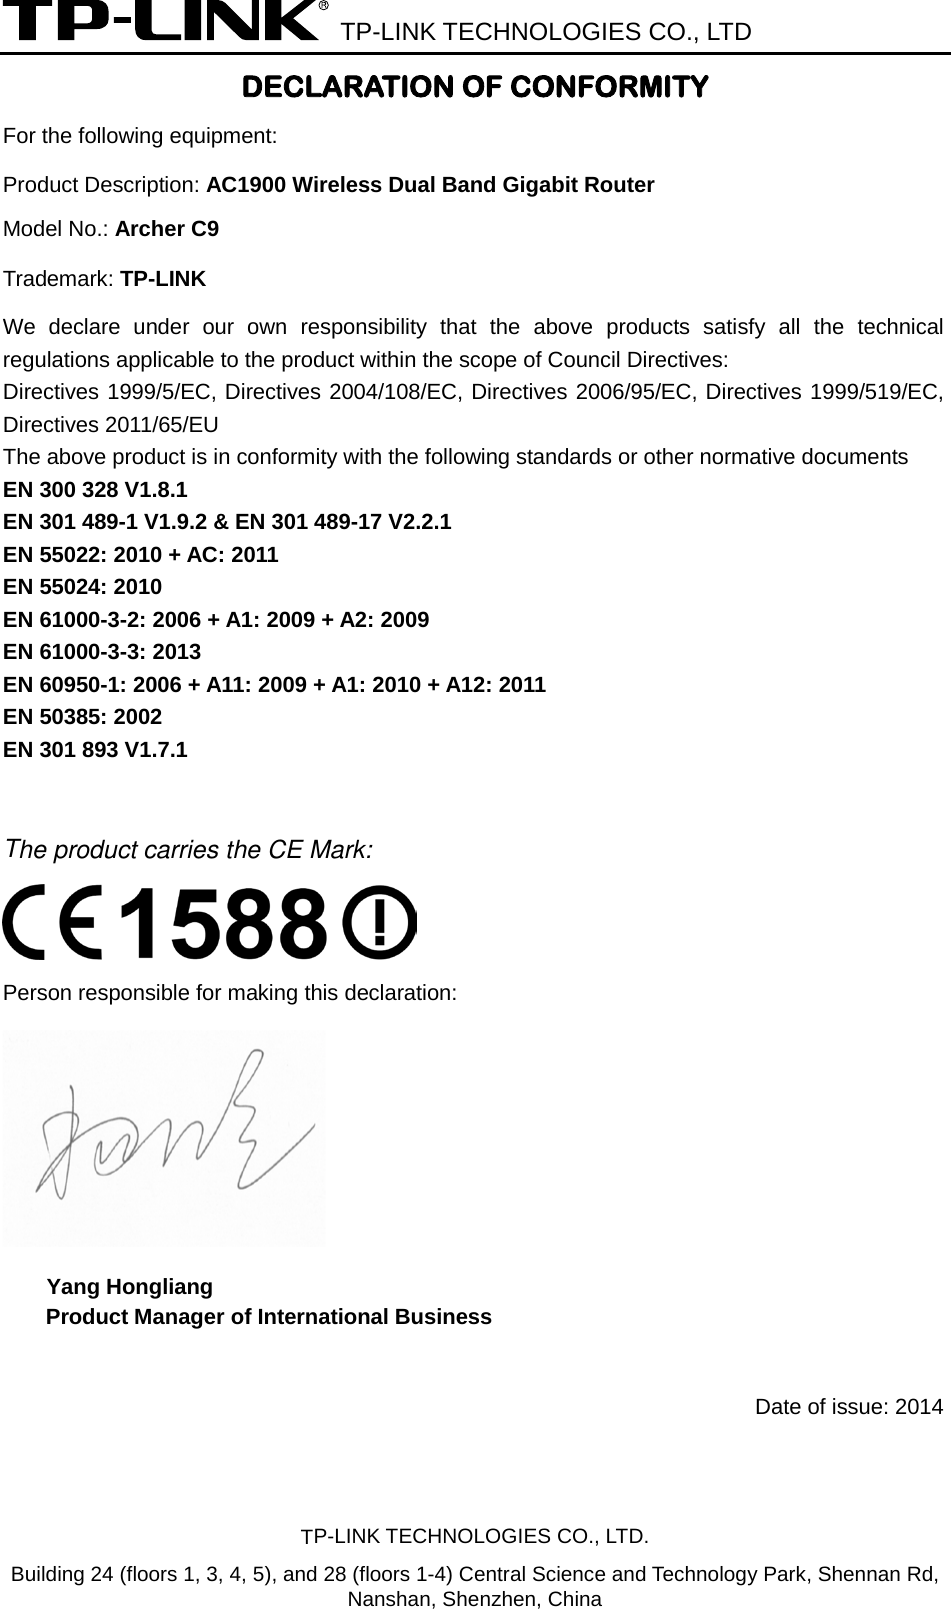  TP-LINK TECHNOLOGIES CO., LTD DECLARATION OF CONFORMITY For the following equipment: Product Description: AC1900 Wireless Dual Band Gigabit Router Model No.: Archer C9 Trademark: TP-LINK  We declare under our own responsibility that the above products satisfy all the technical regulations applicable to the product within the scope of Council Directives:     Directives 1999/5/EC, Directives 2004/108/EC, Directives 2006/95/EC, Directives 1999/519/EC, Directives 2011/65/EU The above product is in conformity with the following standards or other normative documents EN 300 328 V1.8.1     EN 301 489-1 V1.9.2 &amp; EN 301 489-17 V2.2.1     EN 55022: 2010 + AC: 2011 EN 55024: 2010 EN 61000-3-2: 2006 + A1: 2009 + A2: 2009 EN 61000-3-3: 2013 EN 60950-1: 2006 + A11: 2009 + A1: 2010 + A12: 2011     EN 50385: 2002   EN 301 893 V1.7.1  The product carries the CE Mark:  Person responsible for making this declaration:  Yang Hongliang Product Manager of International Business    Date of issue: 2014TP-LINK TECHNOLOGIES CO., LTD. Building 24 (floors 1, 3, 4, 5), and 28 (floors 1-4) Central Science and Technology Park, Shennan Rd, Nanshan, Shenzhen, China 